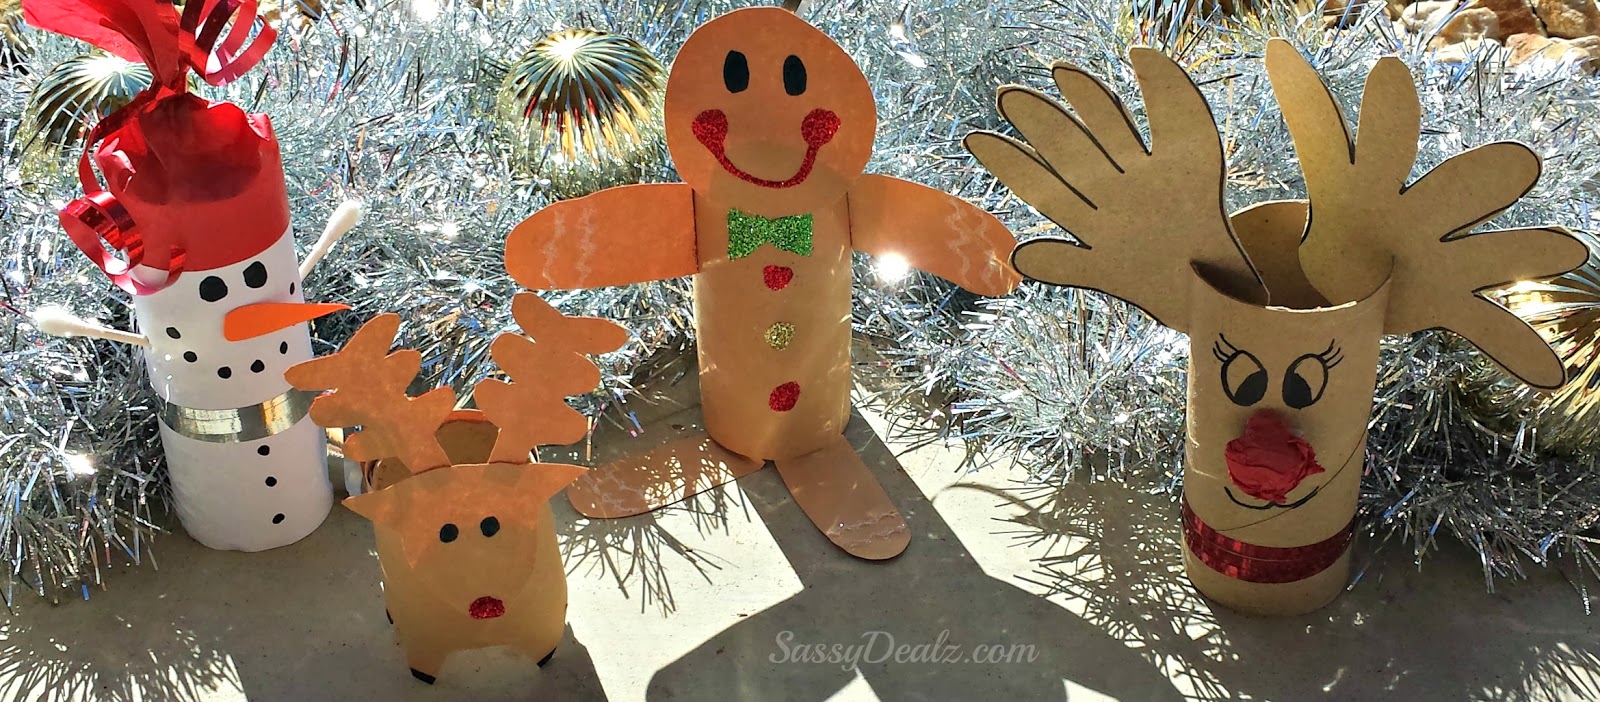 DIY Christmas Toilet Paper Roll Craft Ideas For Kids   Crafty Morning